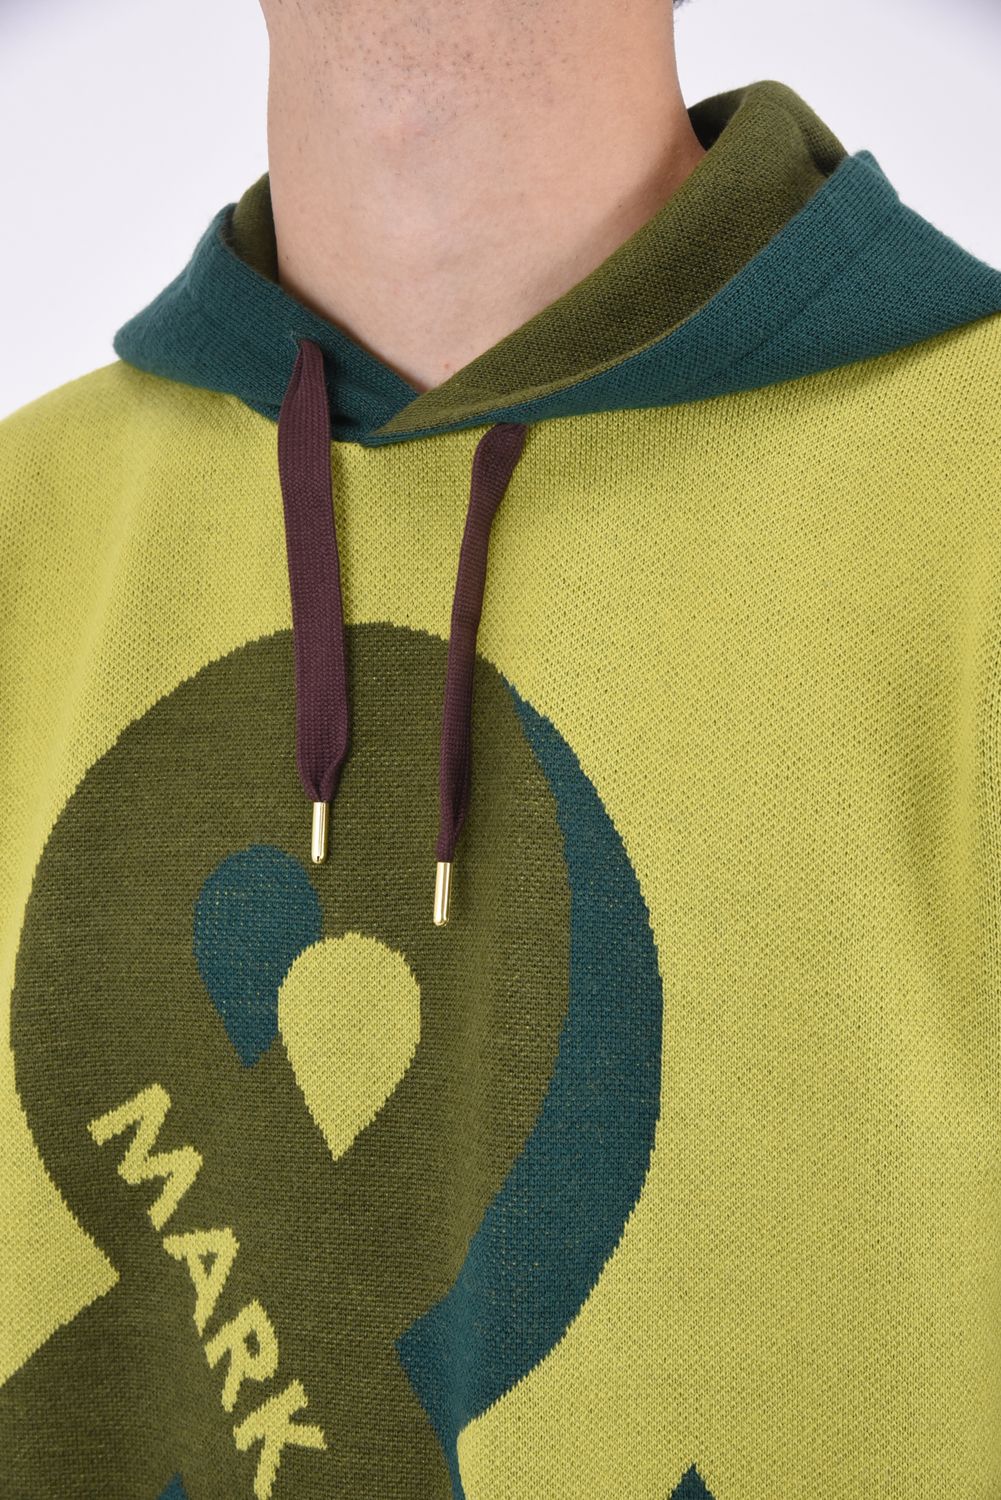 MARK&LONA - AND KNIT HOODIE / 3D調ロゴジャカード バイカラー ニット 